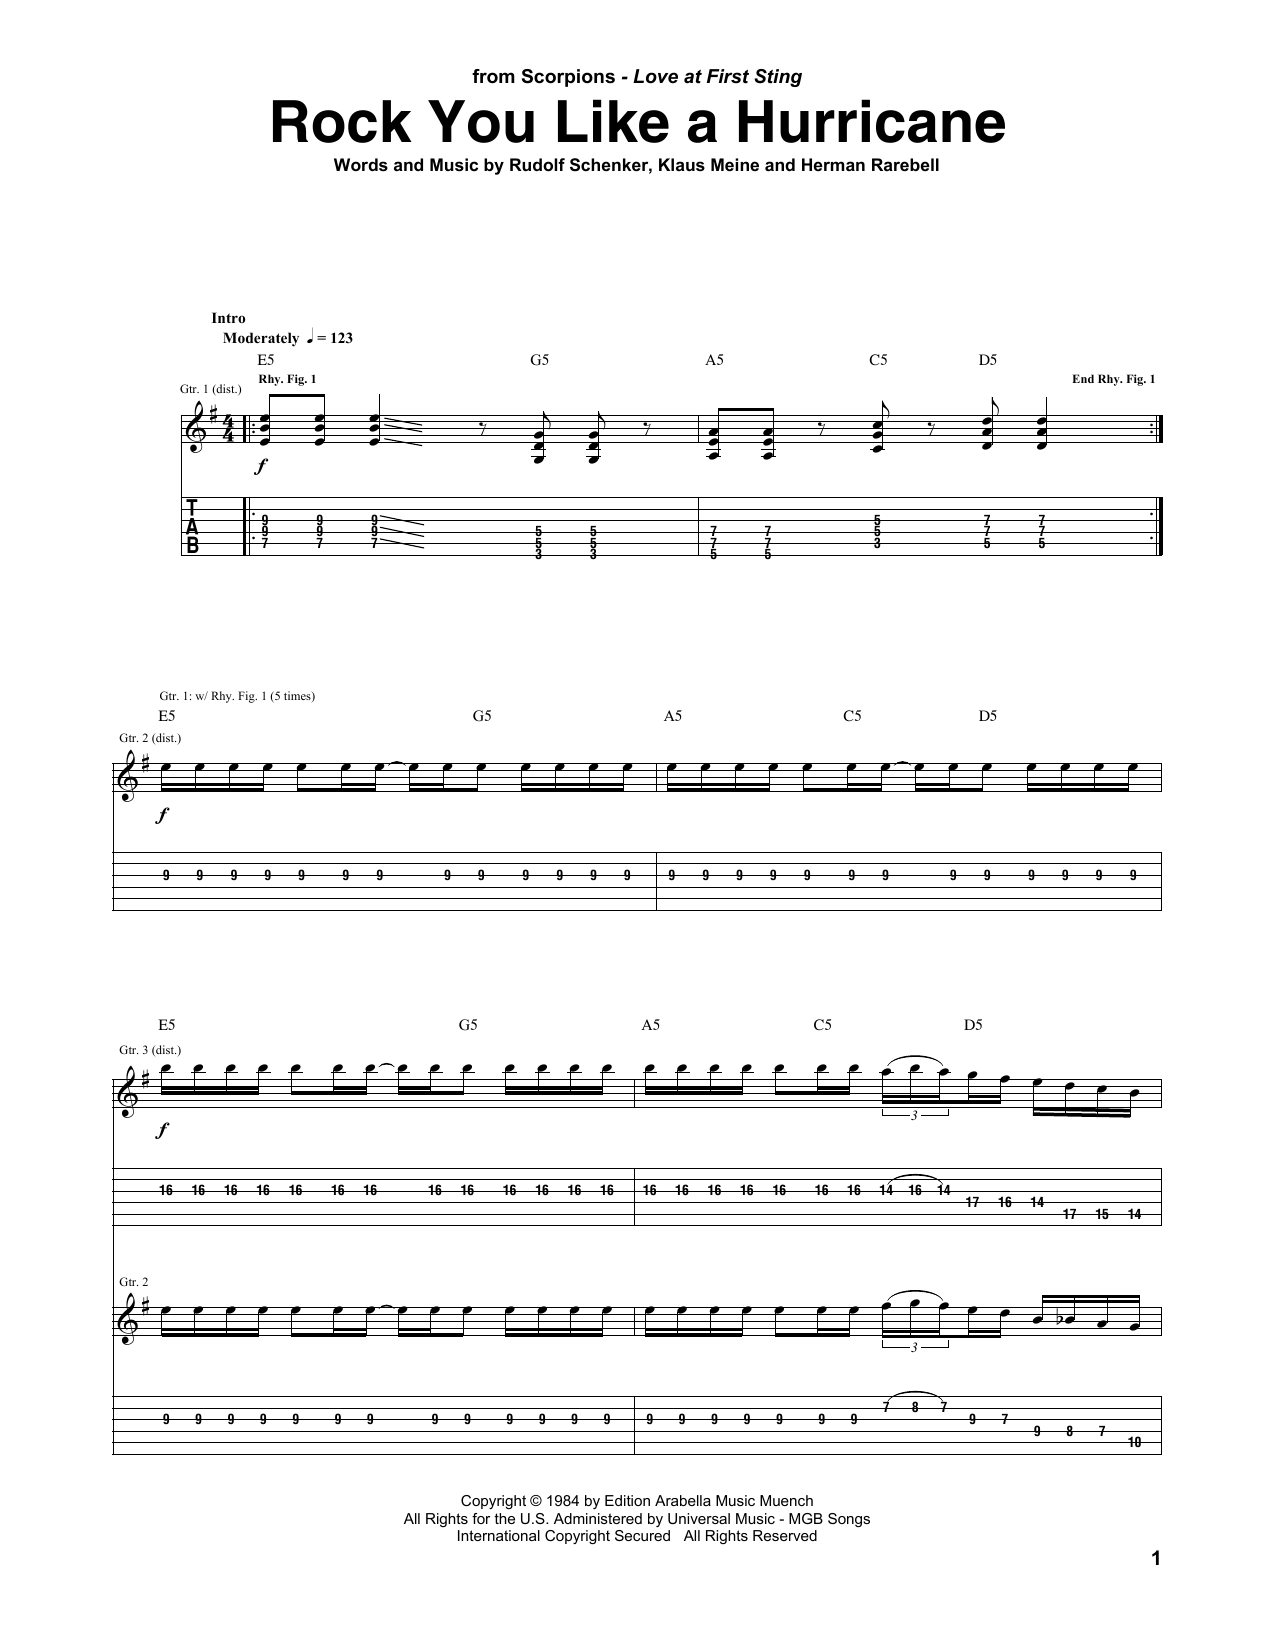 Scorpions Rock You Like A Hurricane sheet music notes and chords. Download Printable PDF.